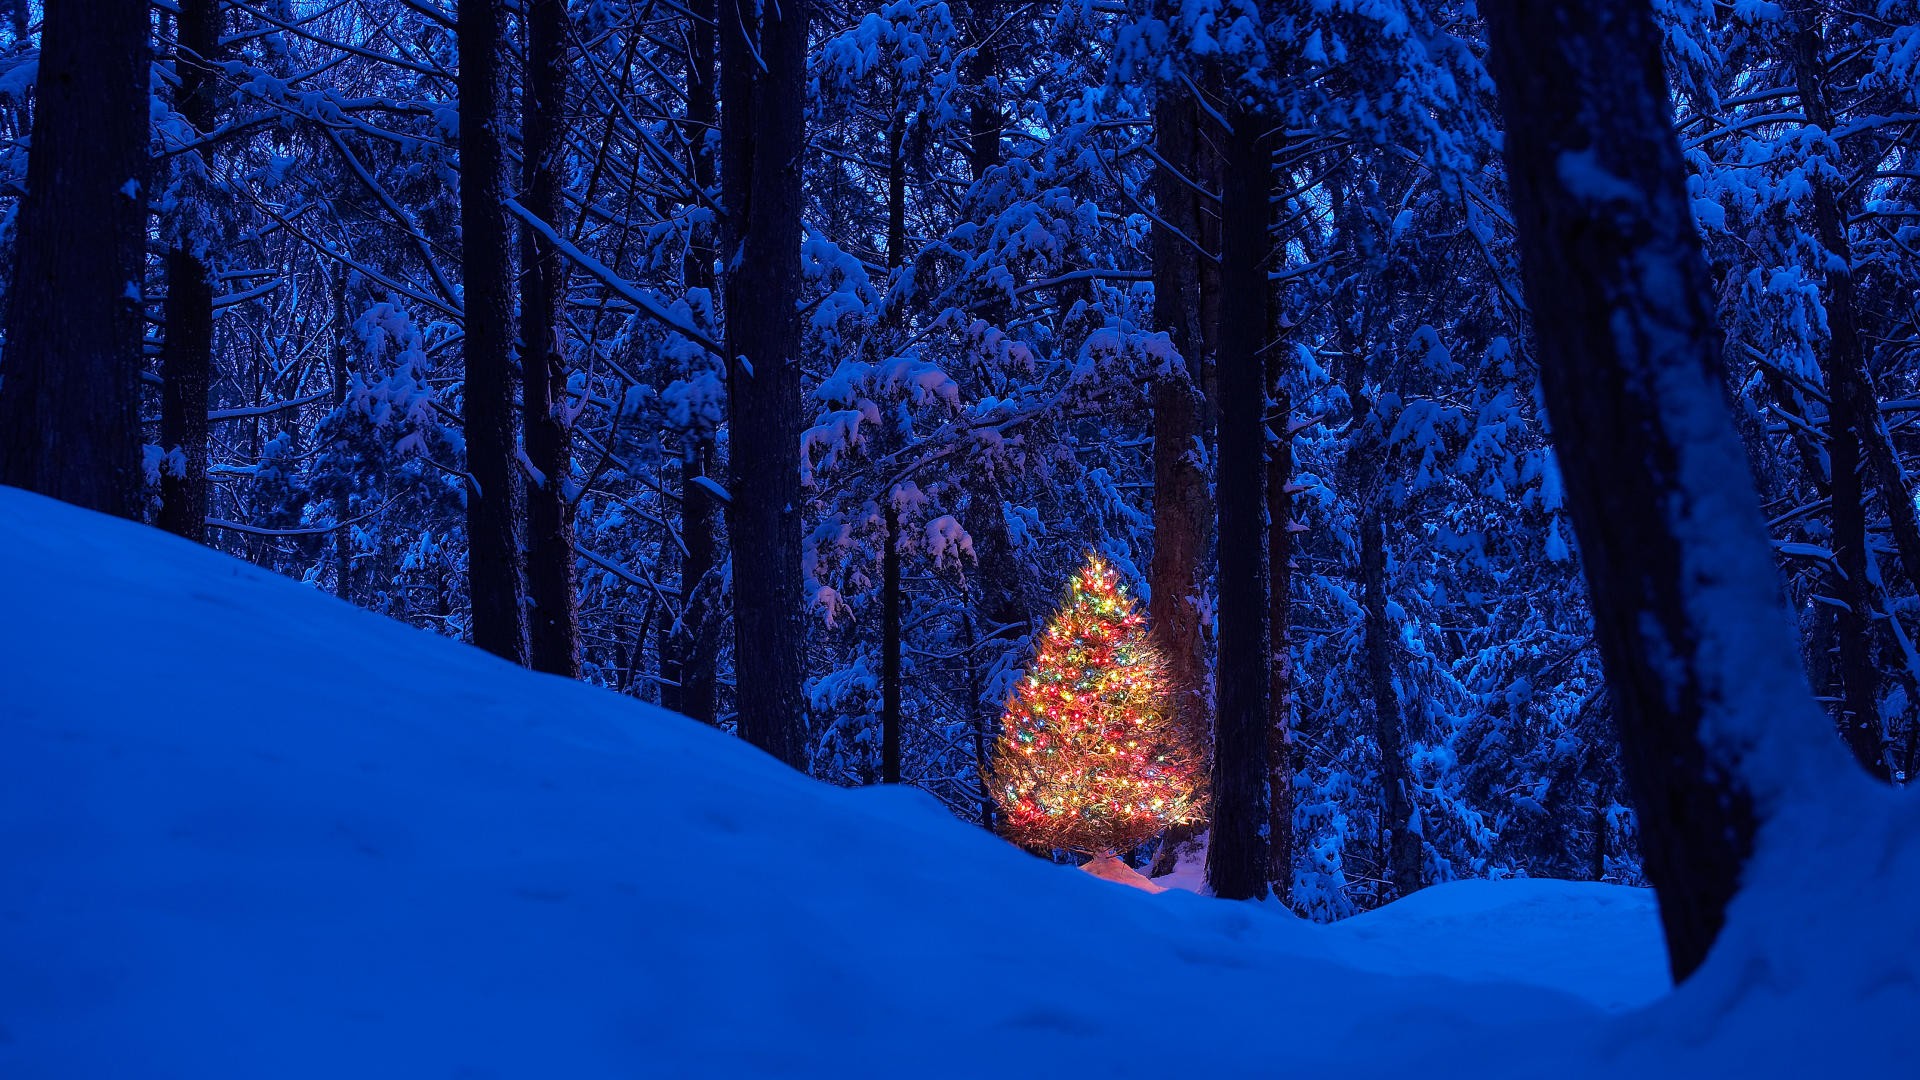 christmas wallpapers 1920x1080,blue,winter,snow,tree,nature